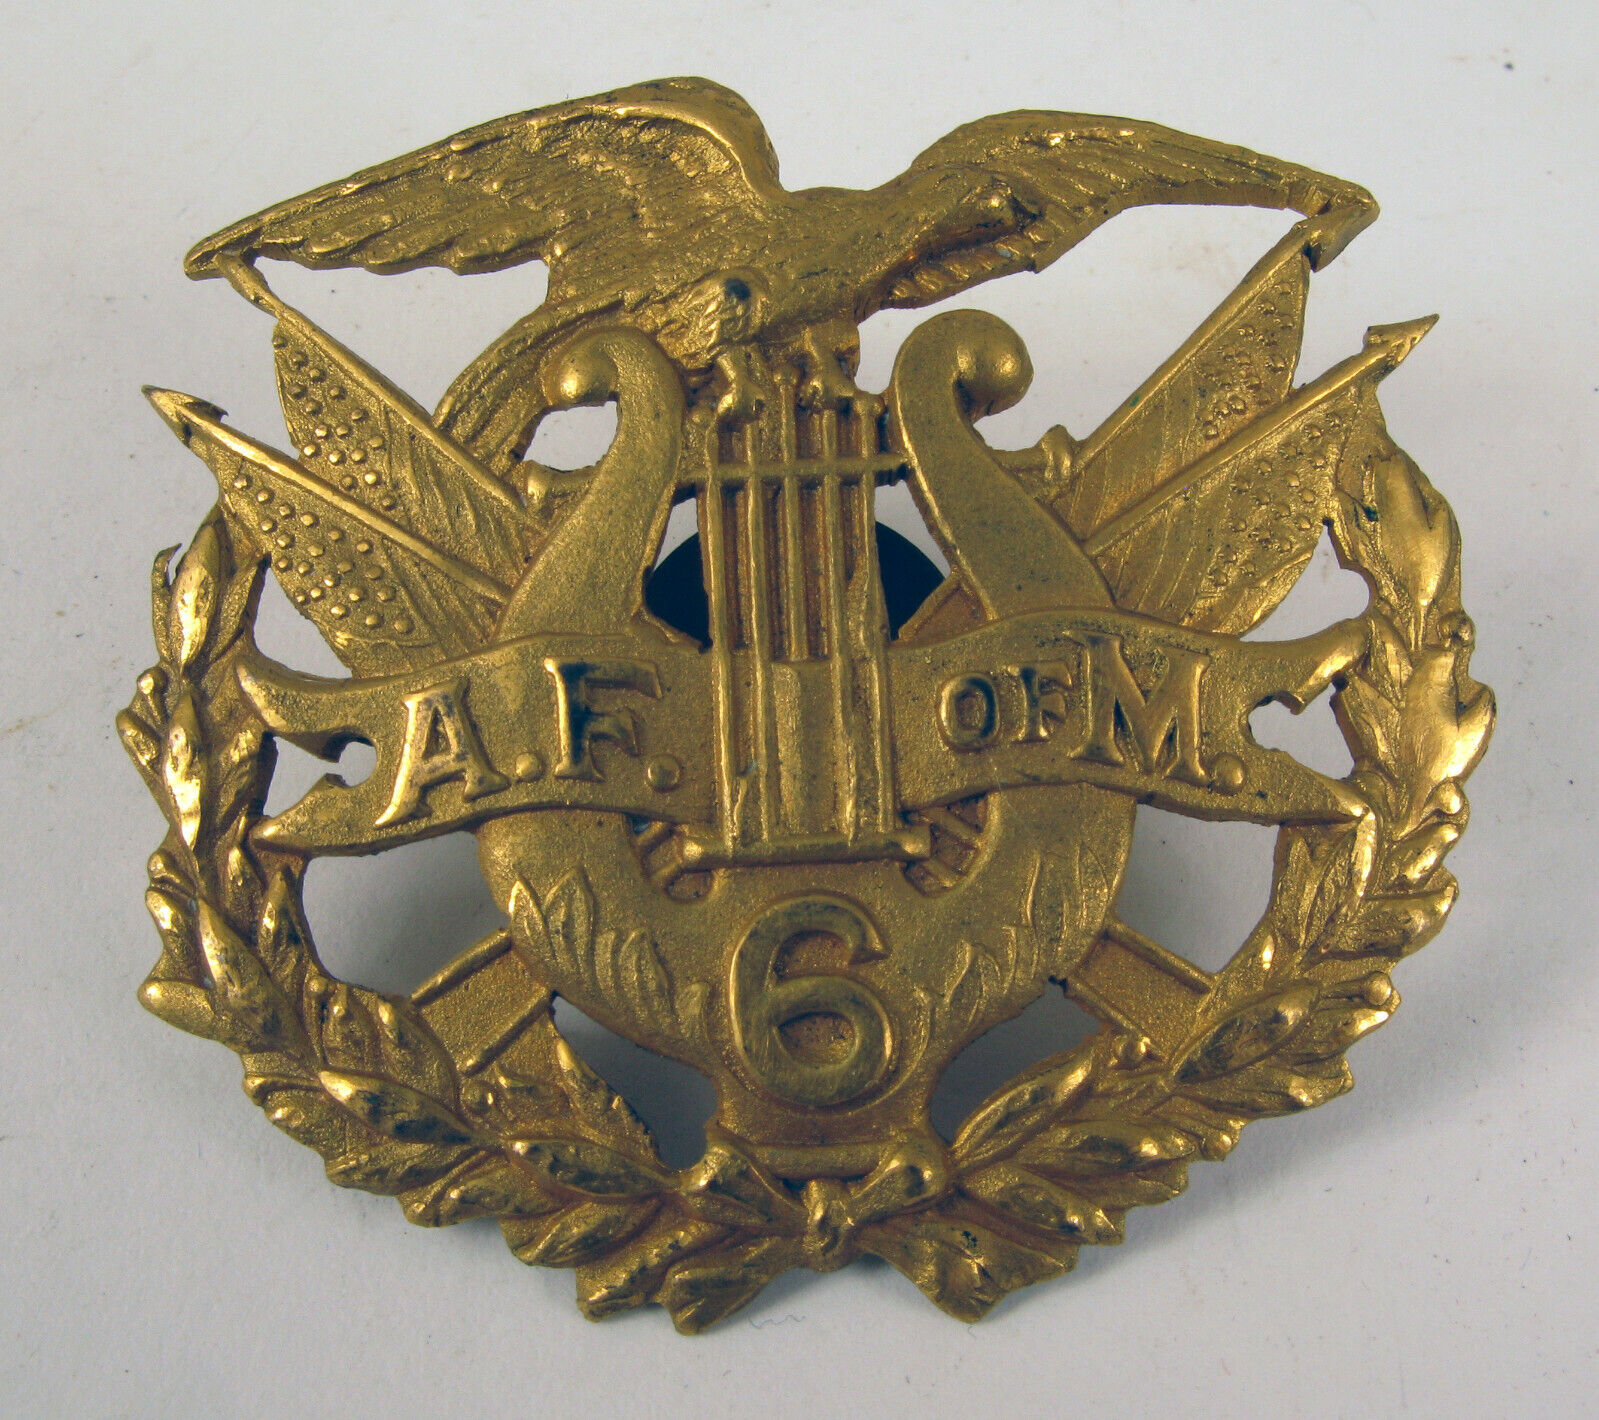 HAT BADGE A. F. of M. BALD EAGLE #6 AMERICAN FEDERATION OF MUSICIANS STEINER 